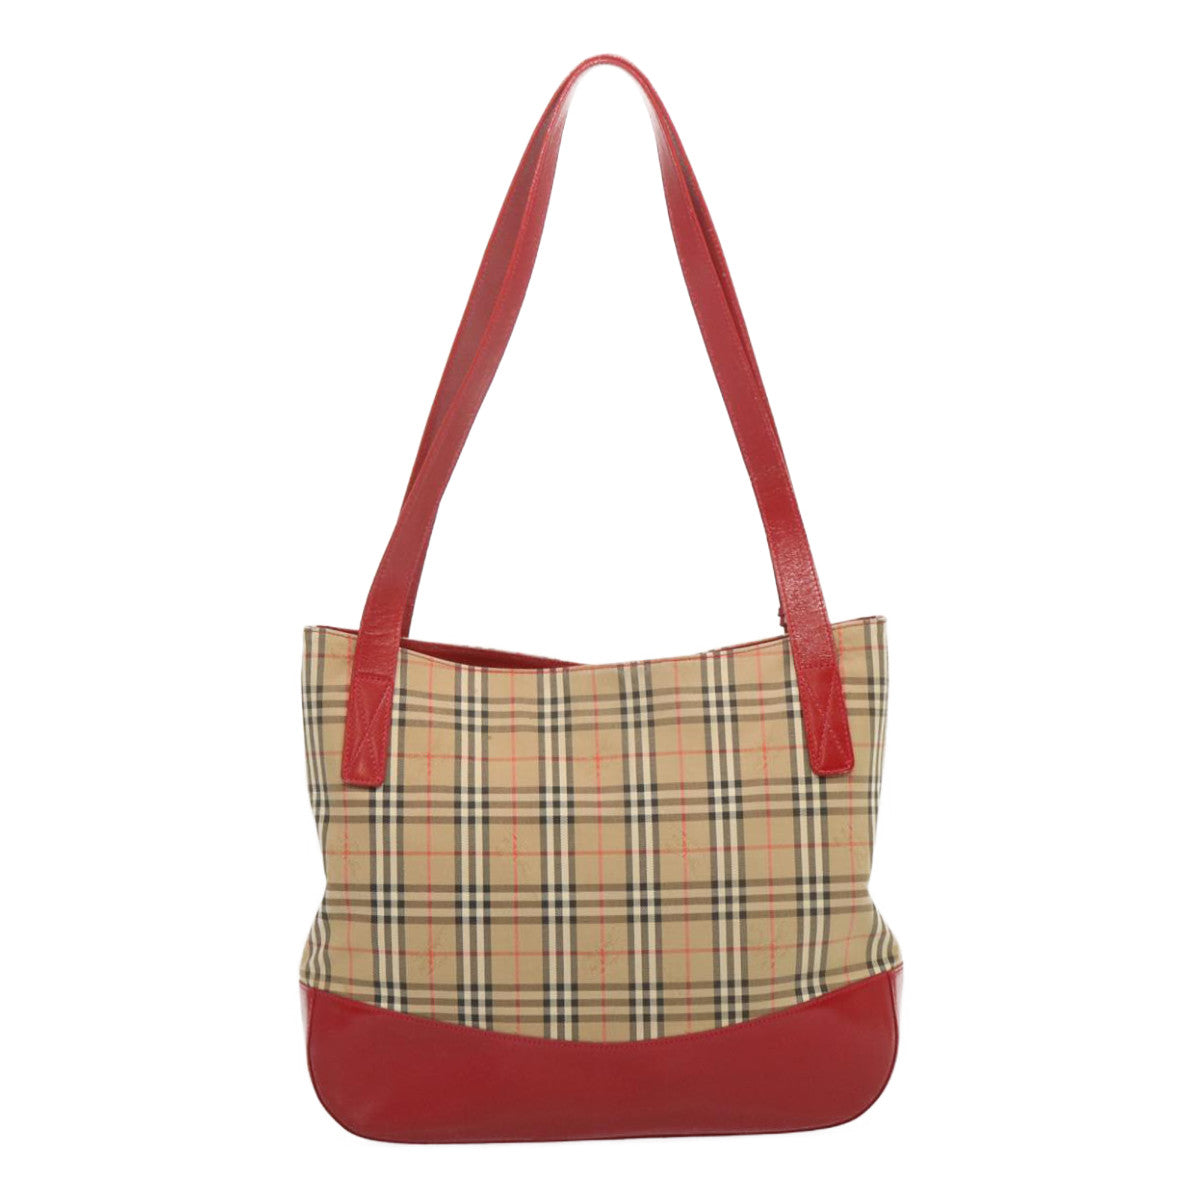 Burberrys Nova Check Tote Bag Canvas Beige Red Auth 67775 - 0